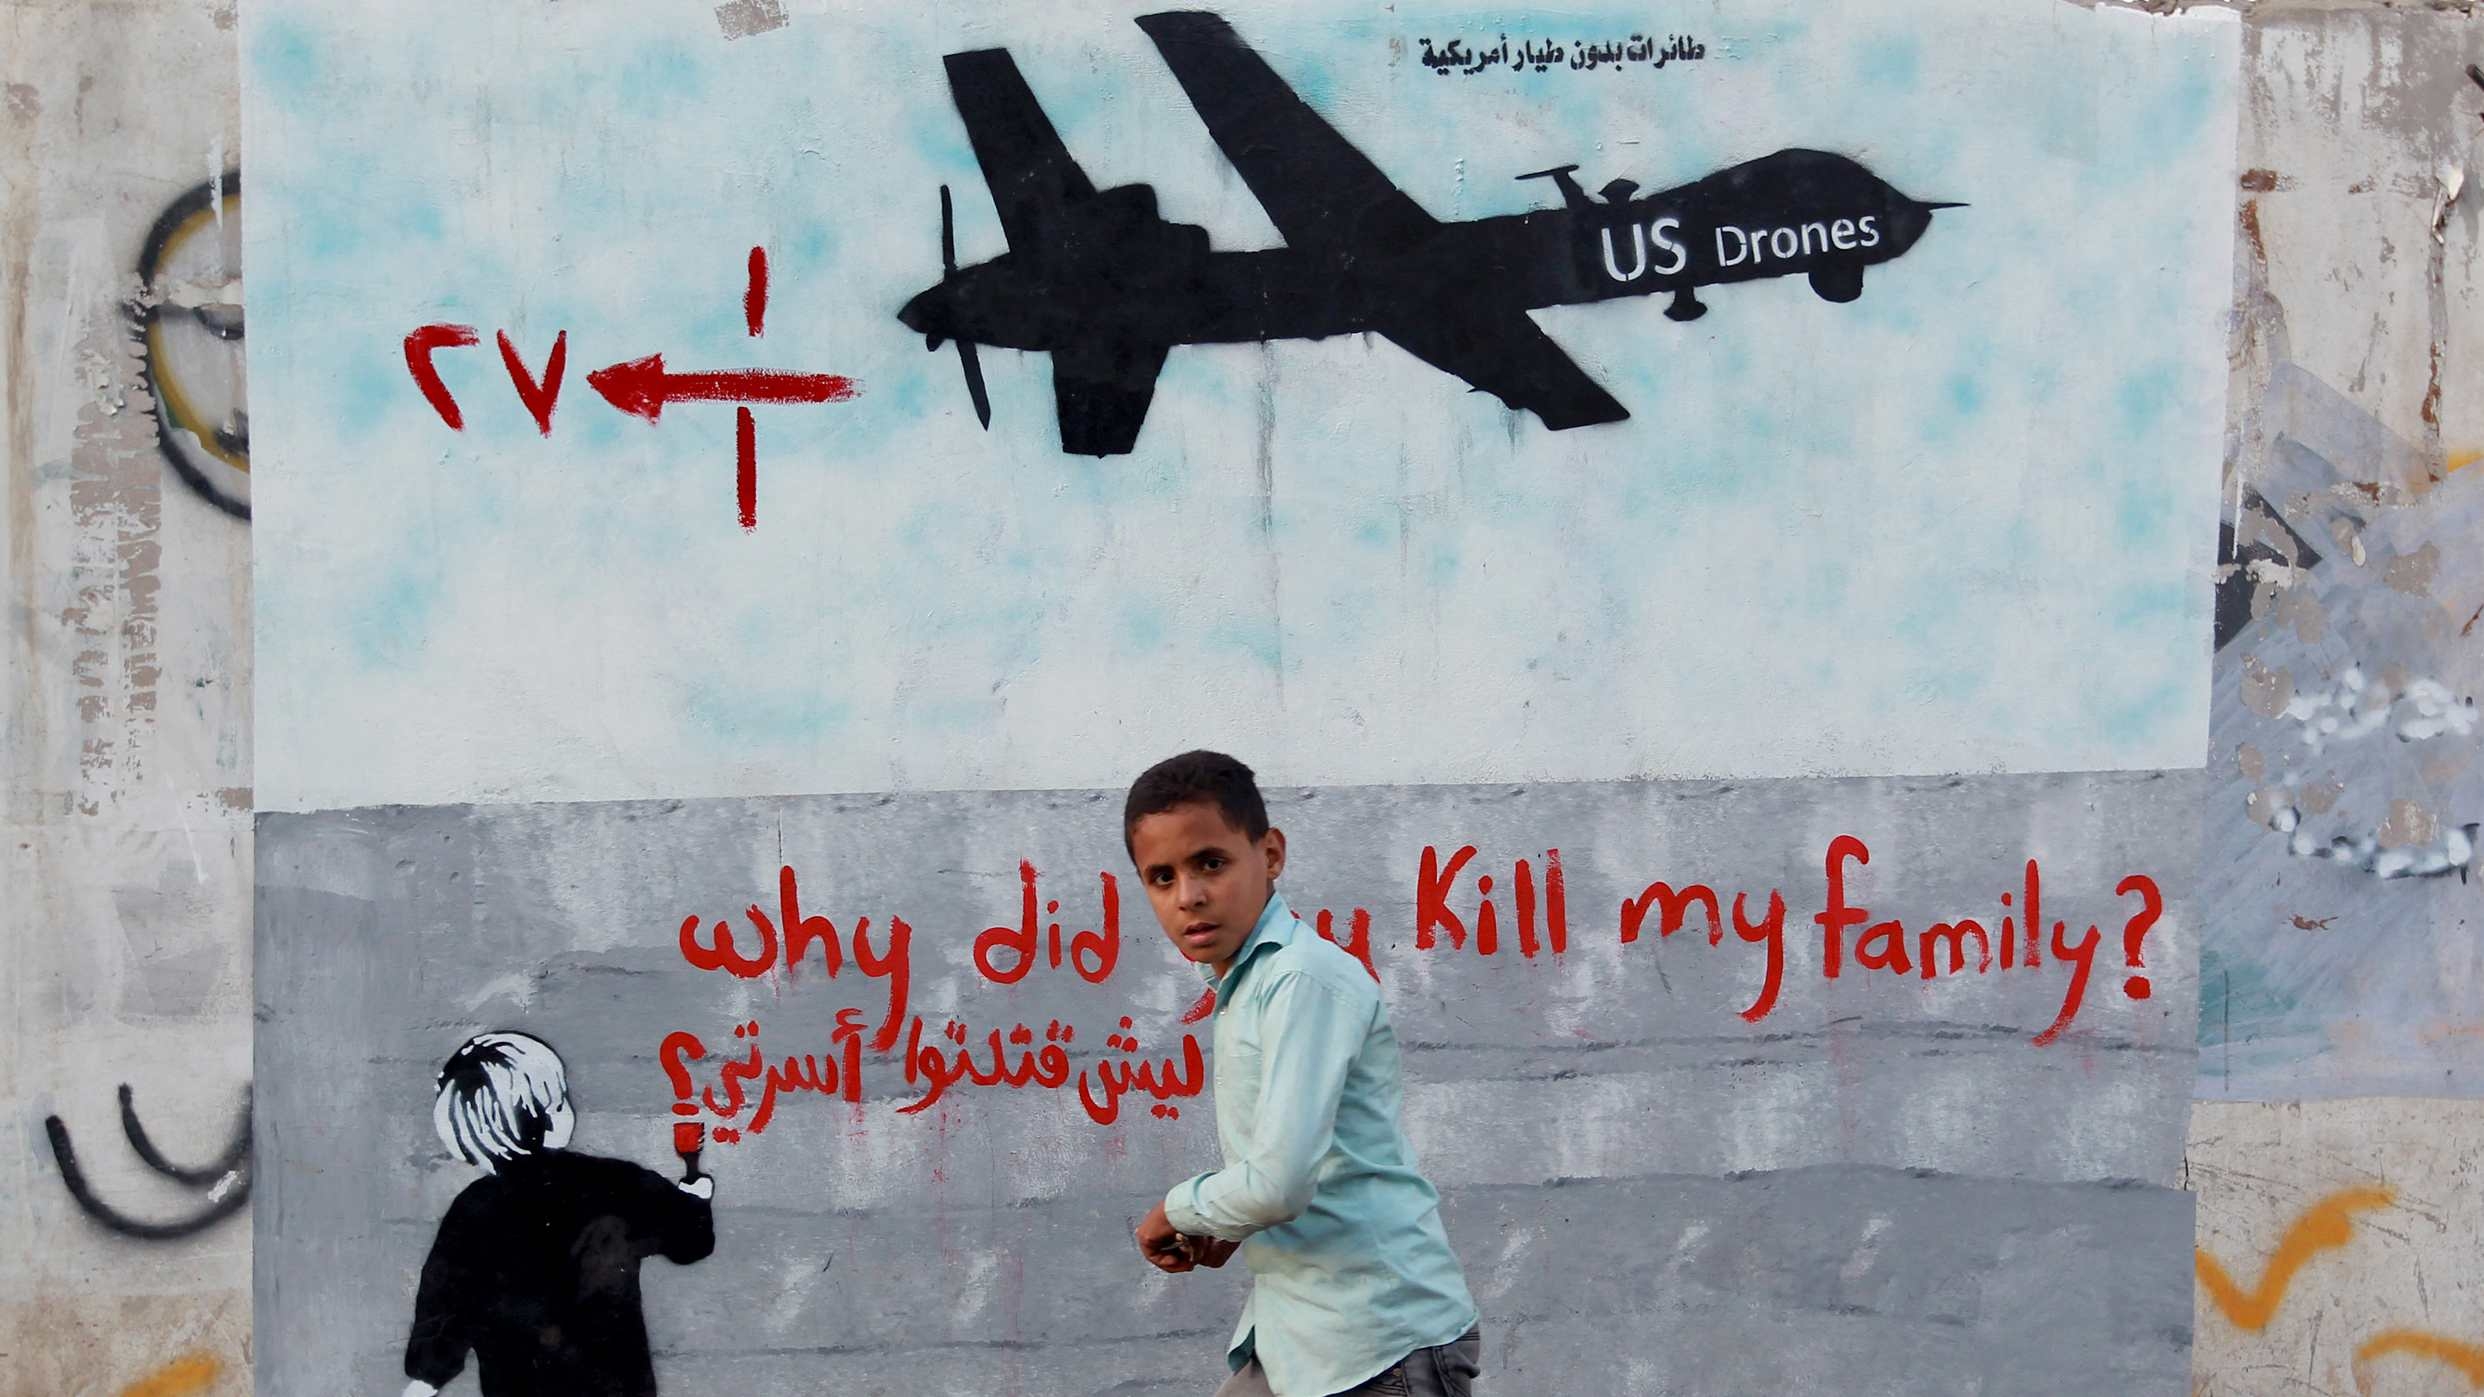 Over the past two decades, the US military has struggled to address the issue of civilian casualties in its operations across the Middle East and Asia, including in Yemen.